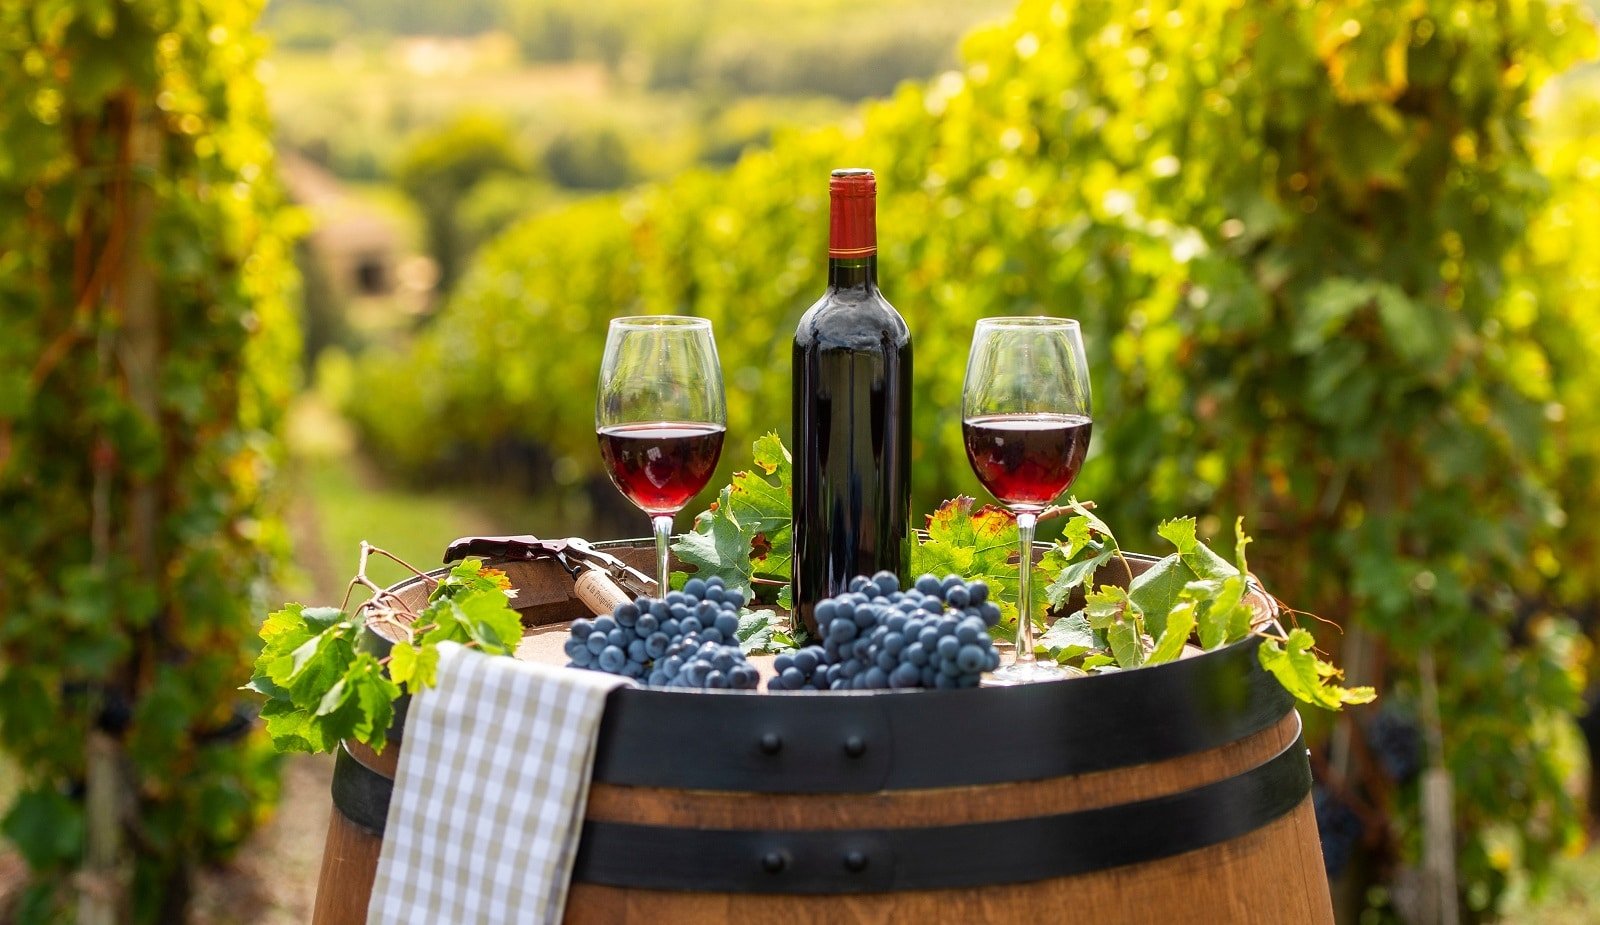 <p>French wines are celebrated across the globe. Regions like Bordeaux, Champagne, and Burgundy offer vineyard tours and tastings that attract connoisseurs and novices alike.</p>